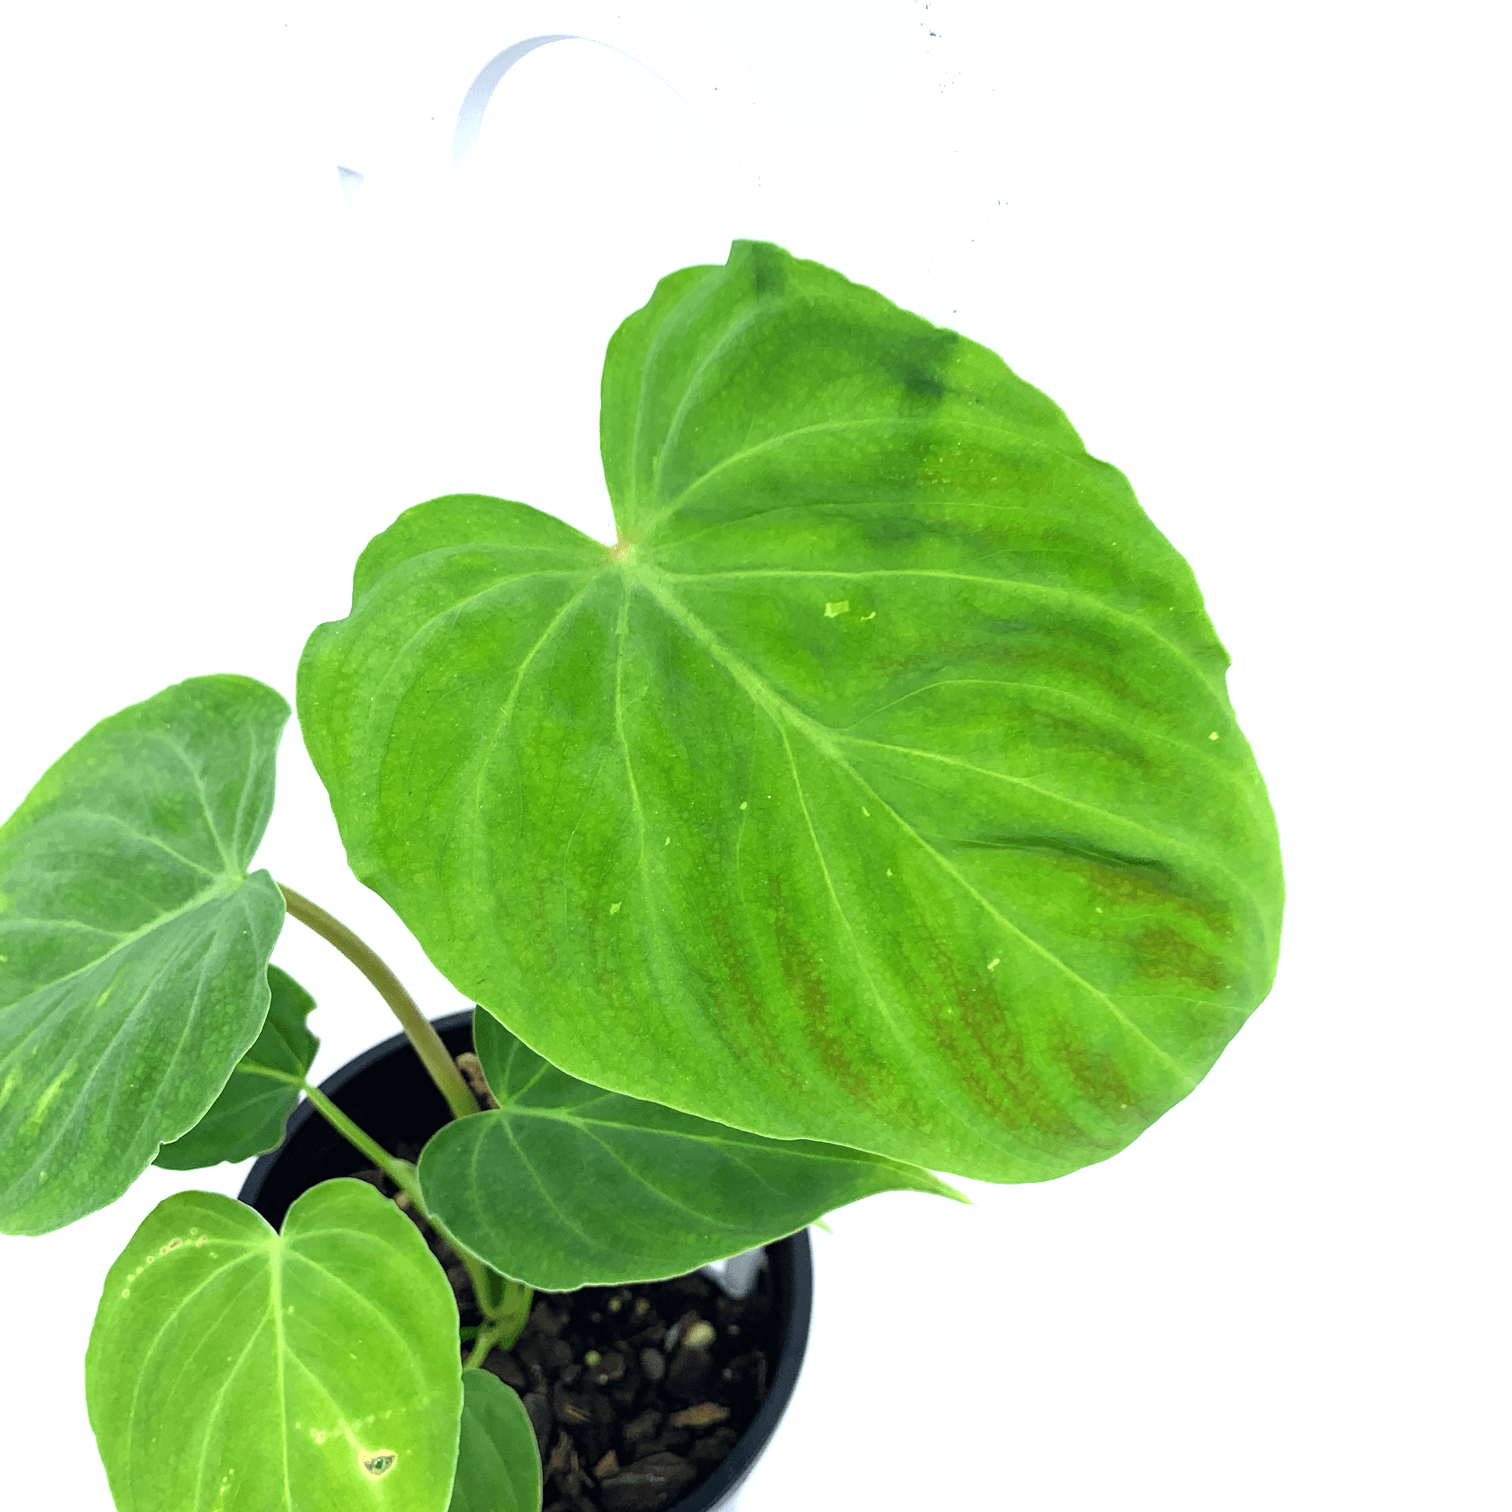 Philodendron - Verrucosum - The Plant Buddies